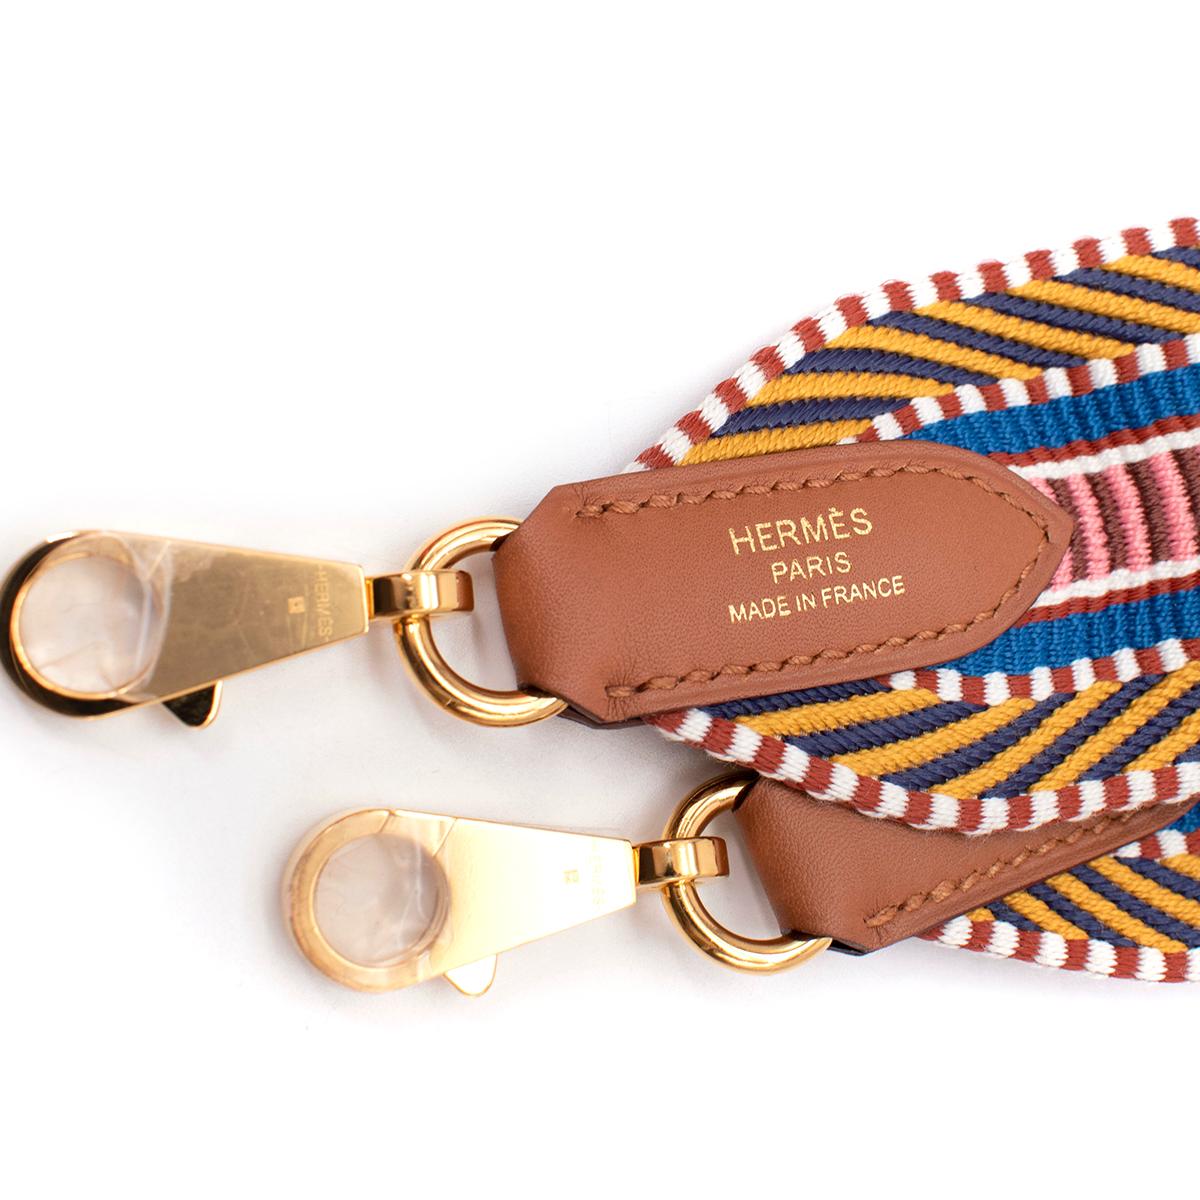 Hermes Sangle Cavale 50mm Bag Strap

Bag strap in Cavale canvas and Swift calfskin with gold plated hardware, large snap hook

Colourway - Ambre/Rose D'été/Gold

Age: C 2018

Material:
100% swift leather 
100% Cavale canvas 

Made in France 

PLEASE